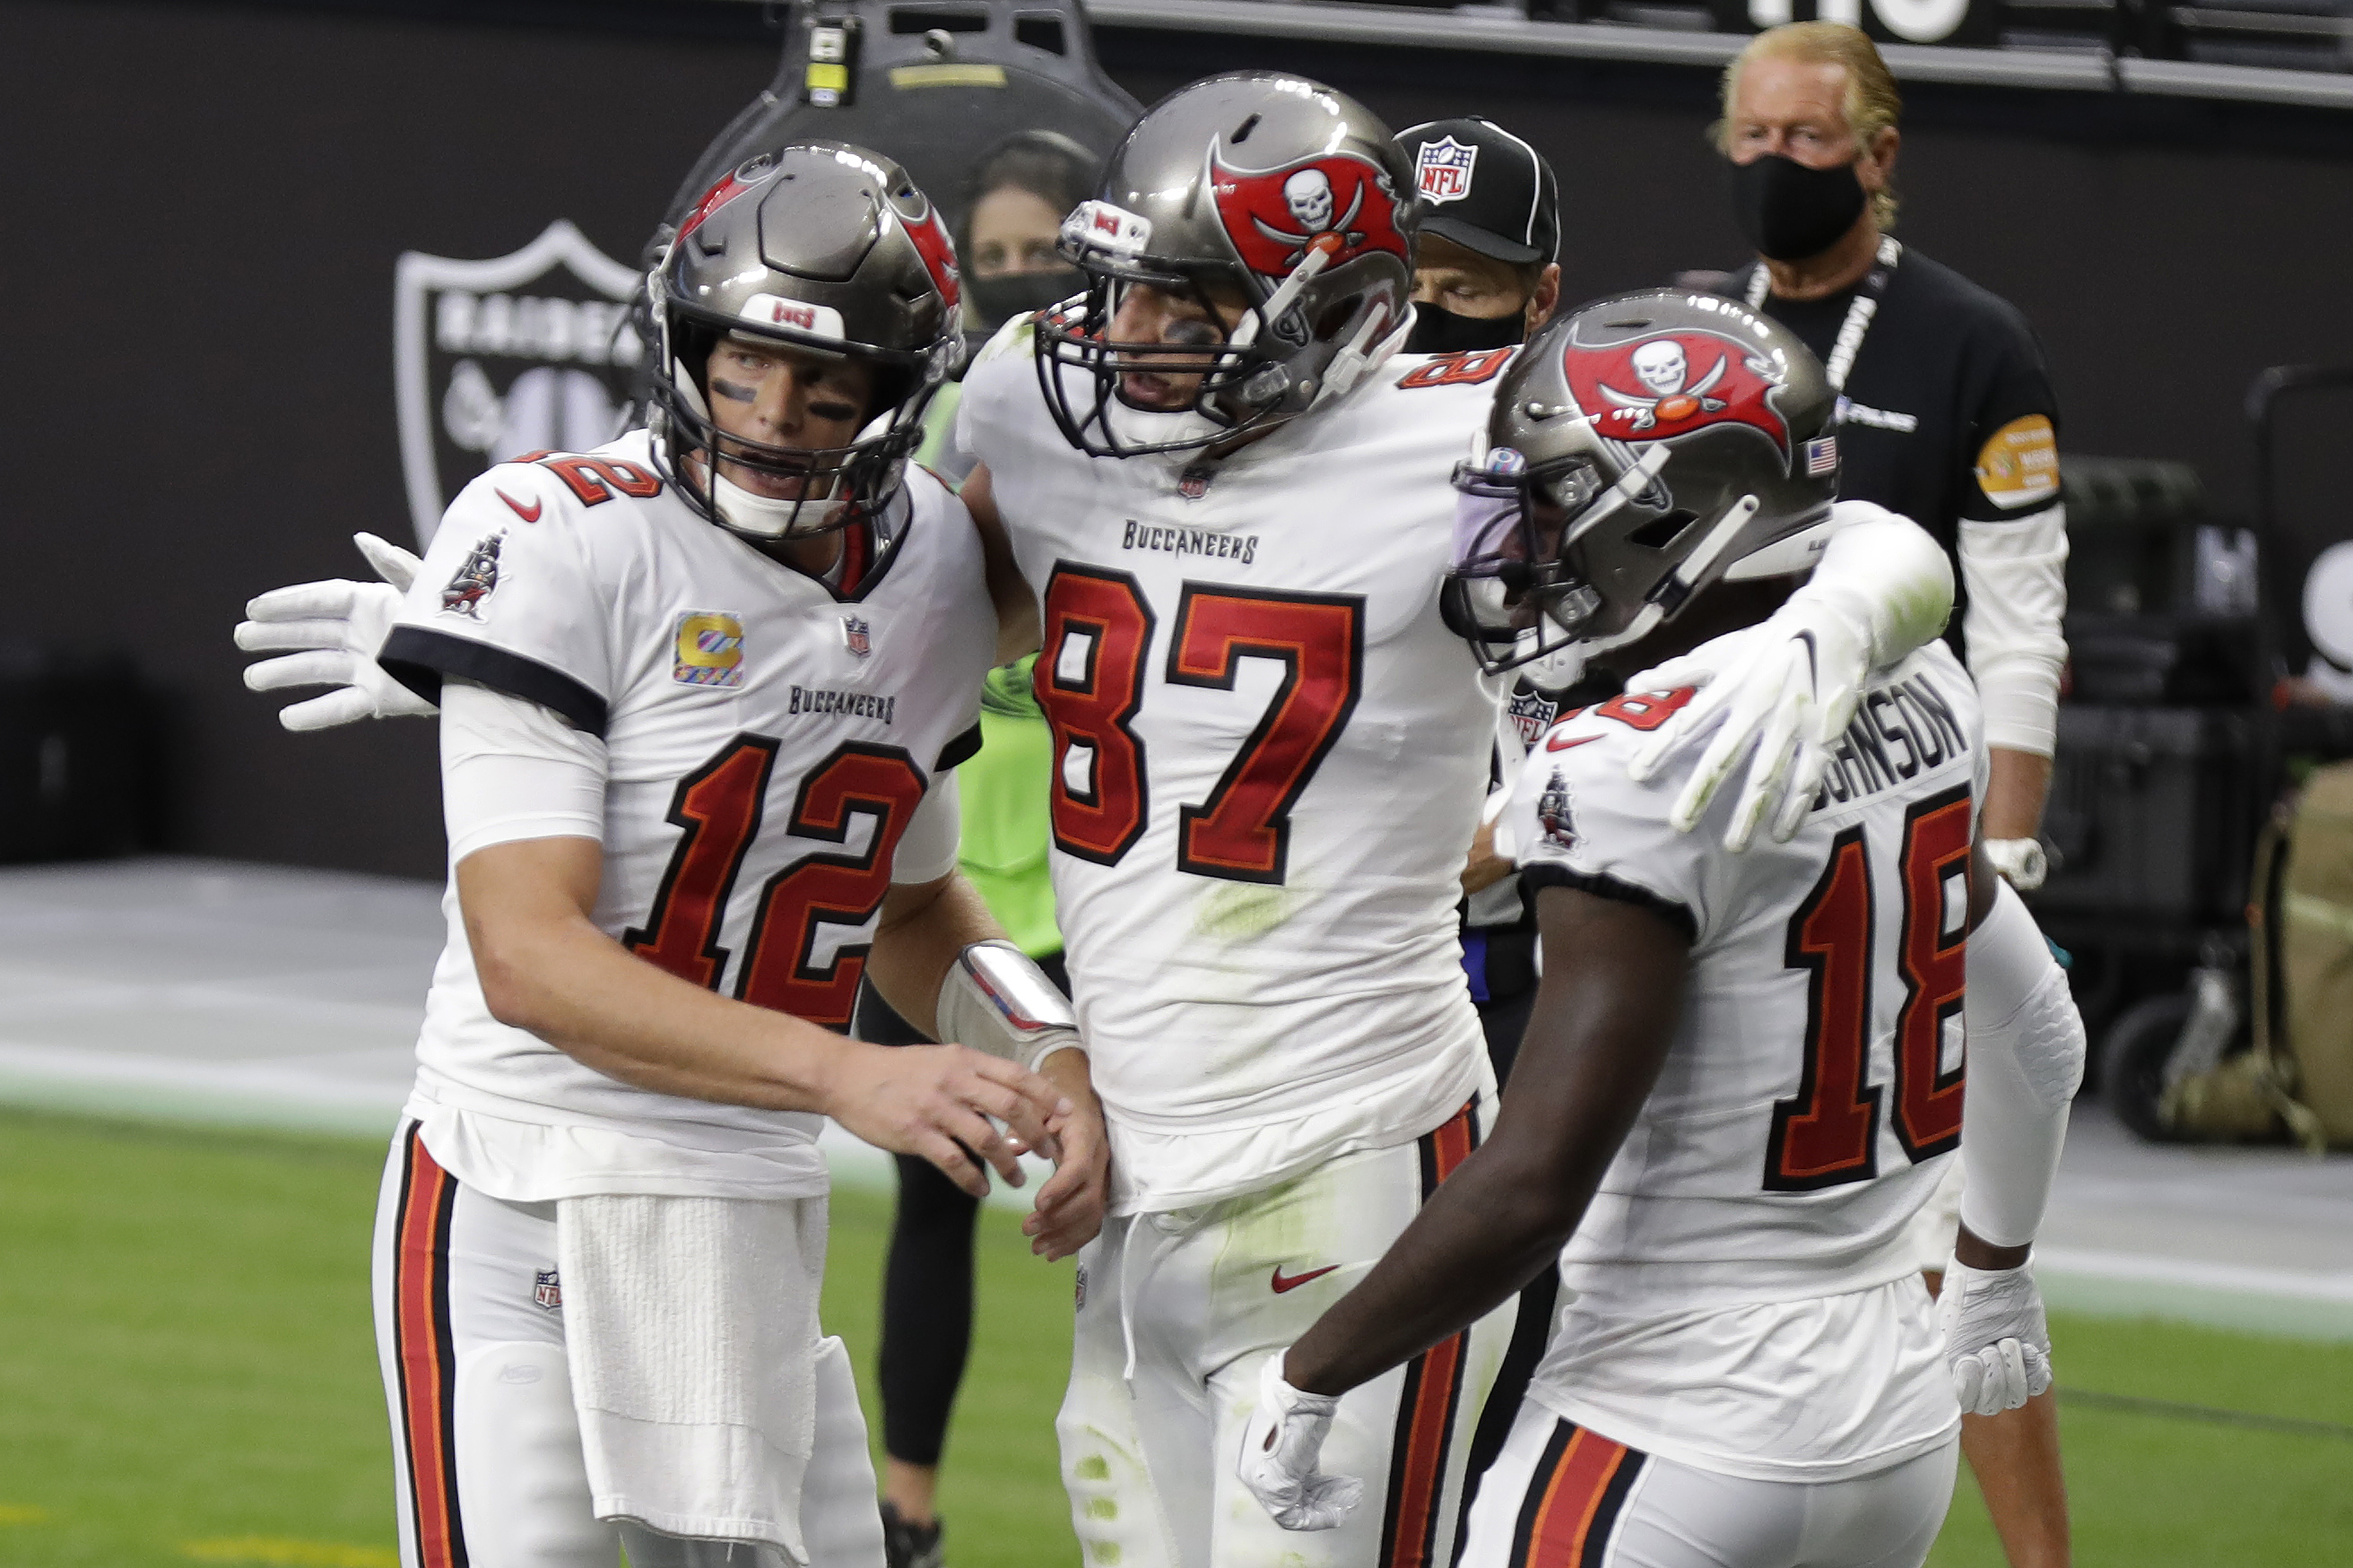 Notes and stats from the Bucs 45-20 win over the Raiders - Bucs Nation